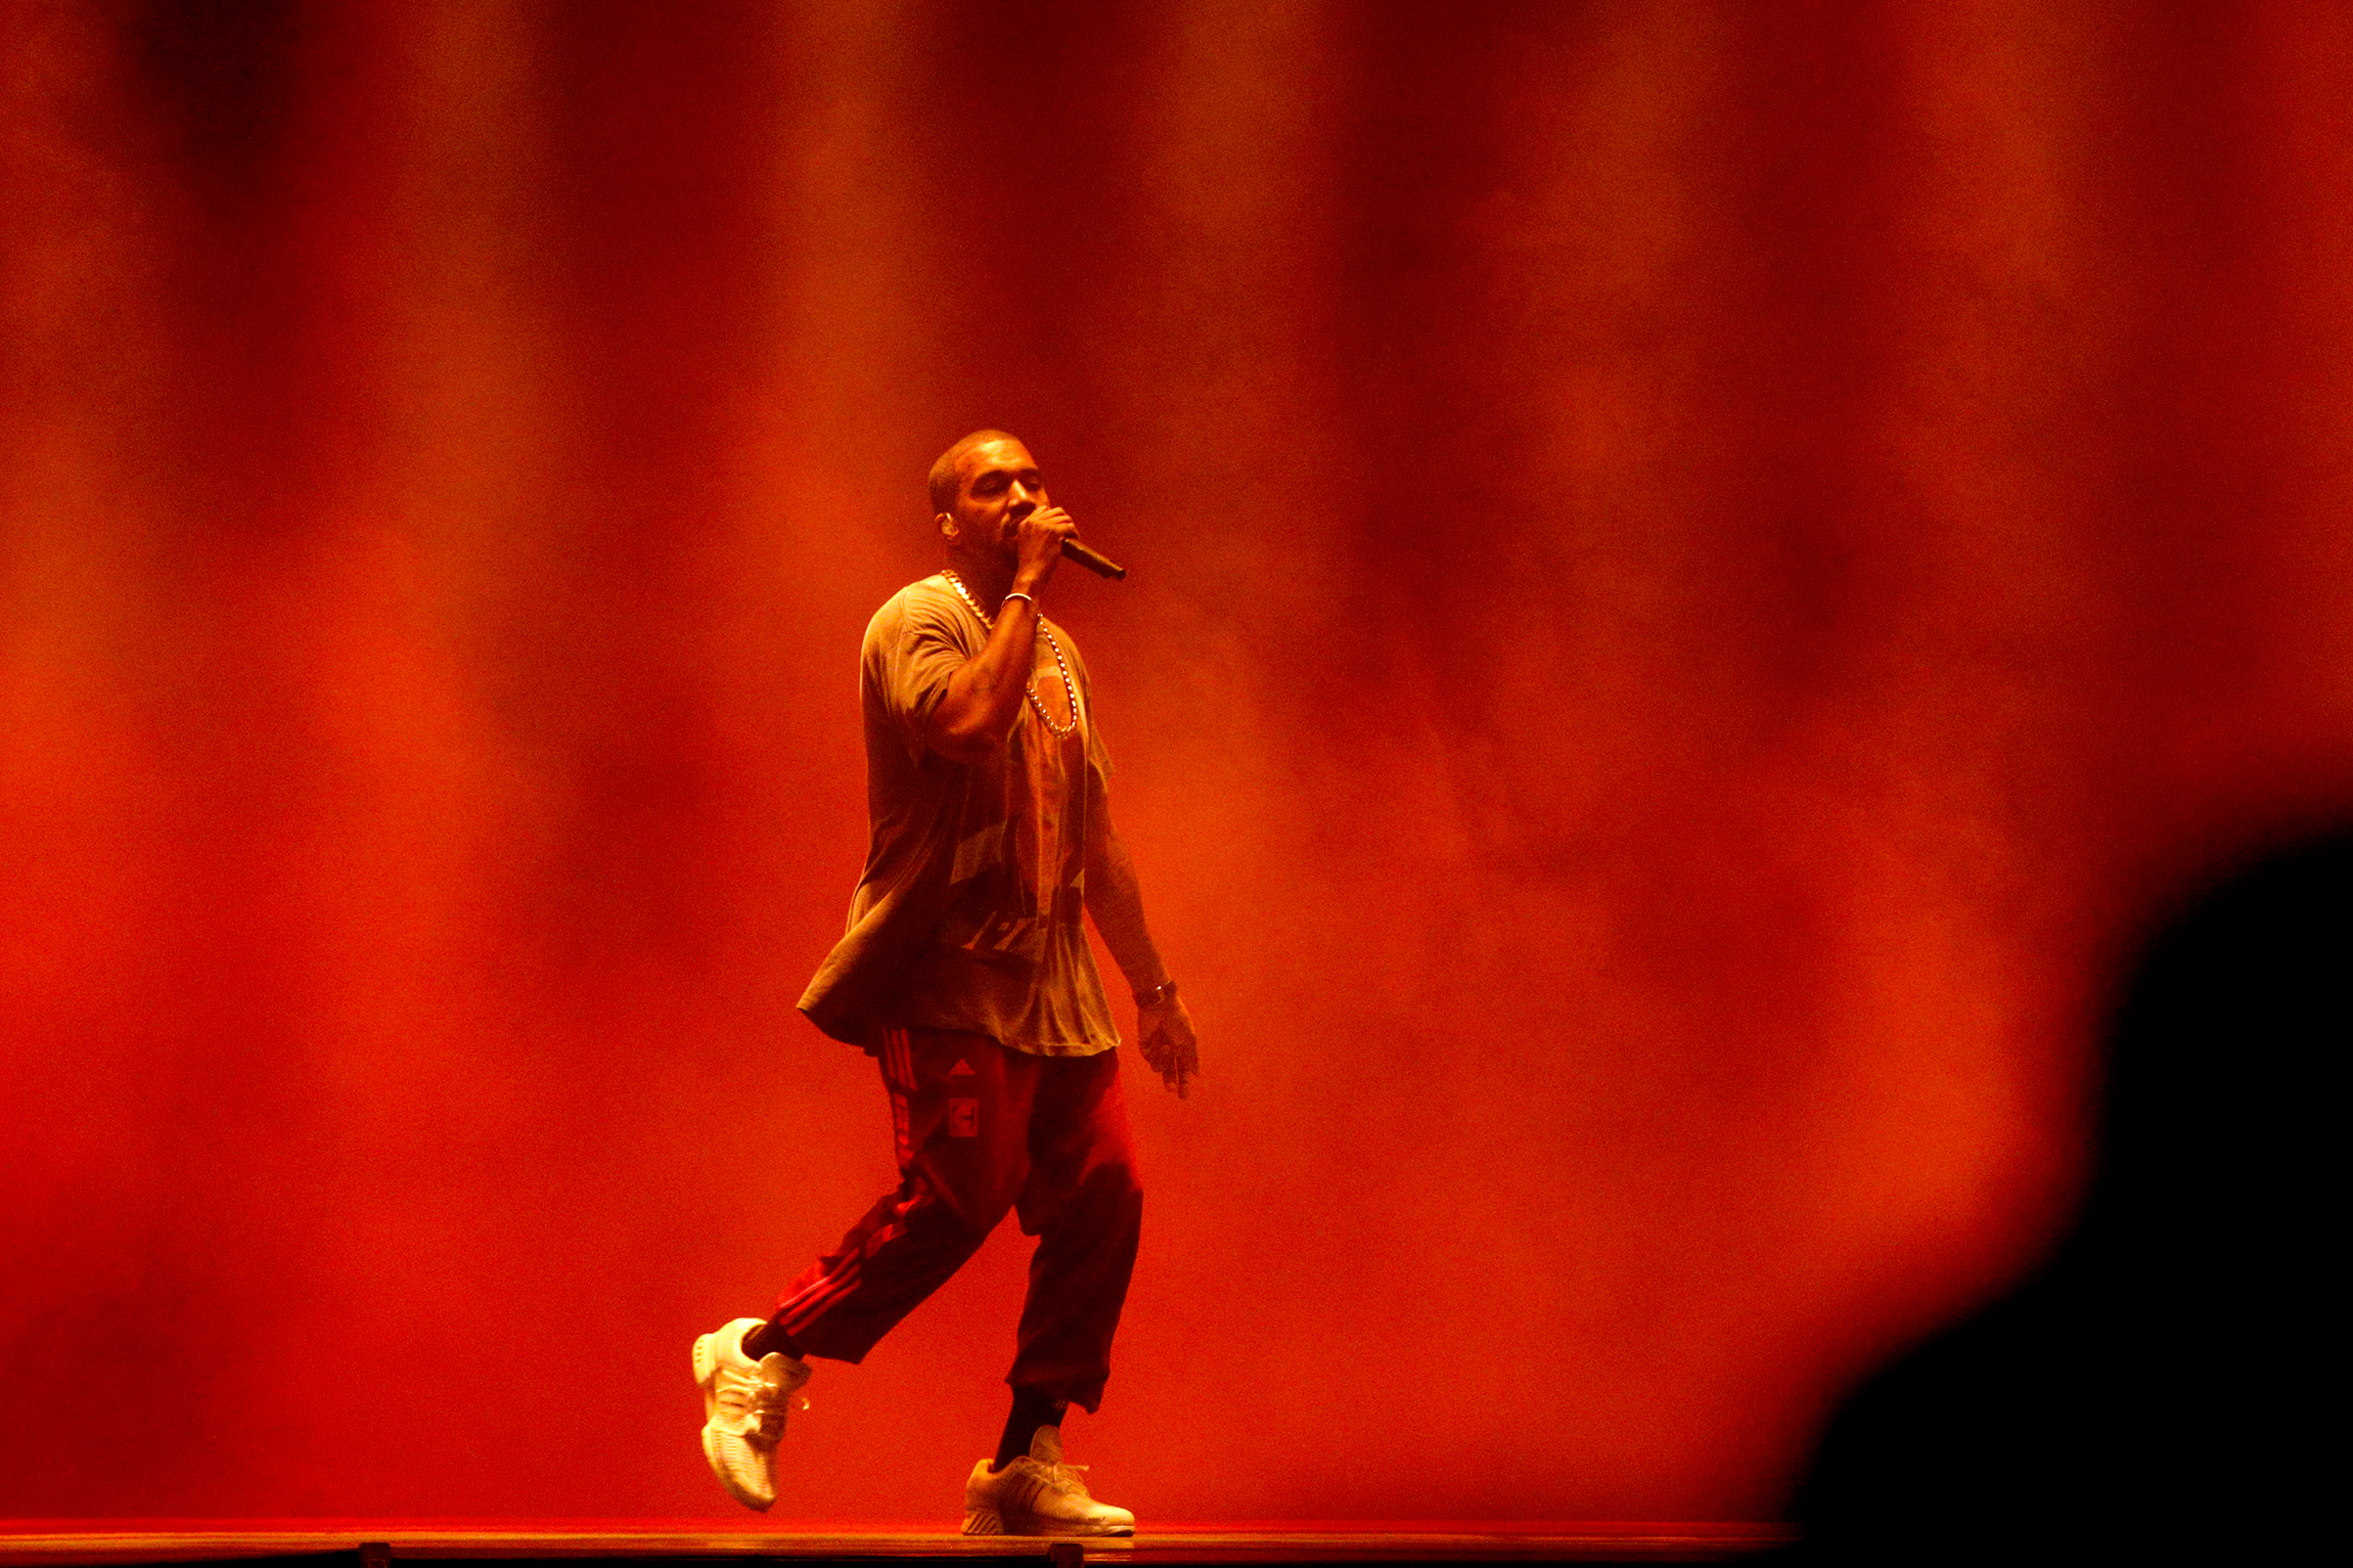 Kanye West performs onstage during The Meadows Music & Arts Festival on Oct. 2, 2016 in New York. (Taylor Hill—The Meadows/Getty Images)